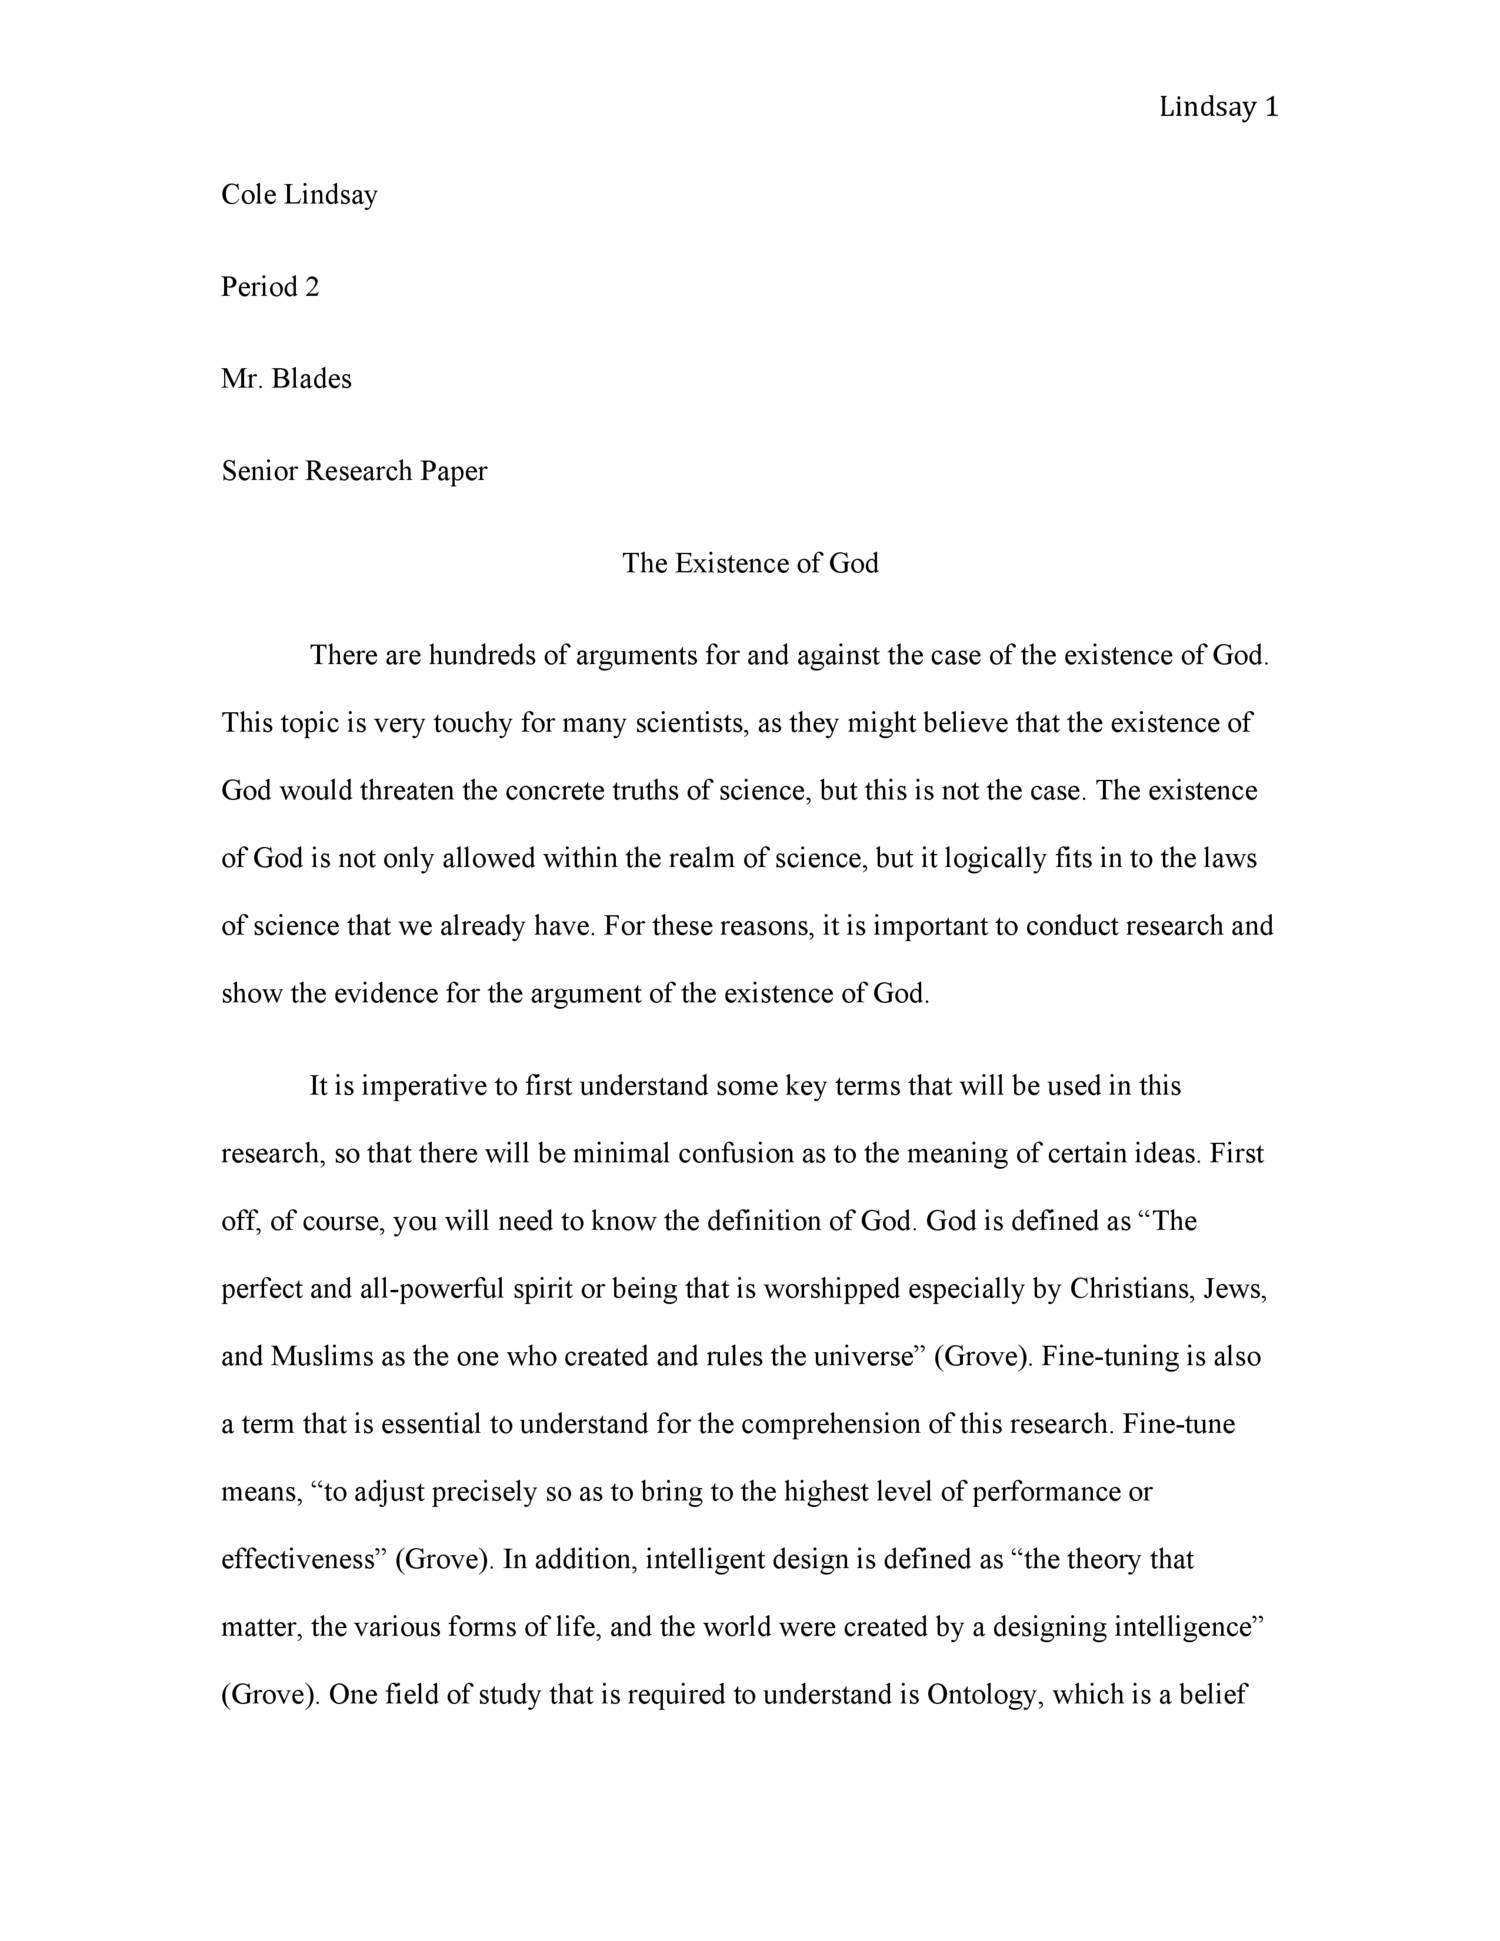 research paper rough draft example